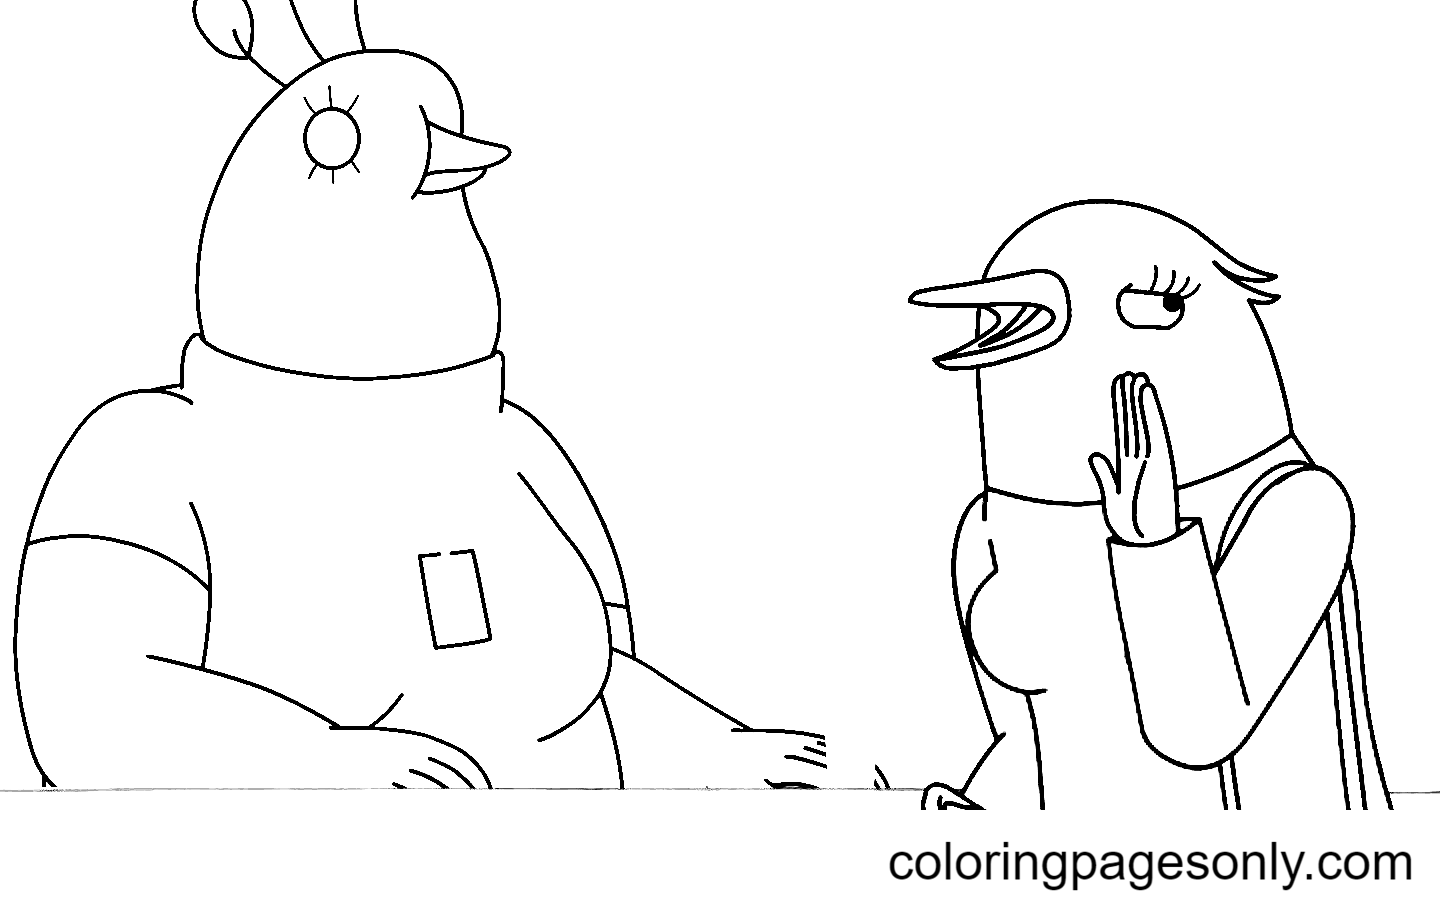 Tuca & Bertie Vibe Check Coloring Pages